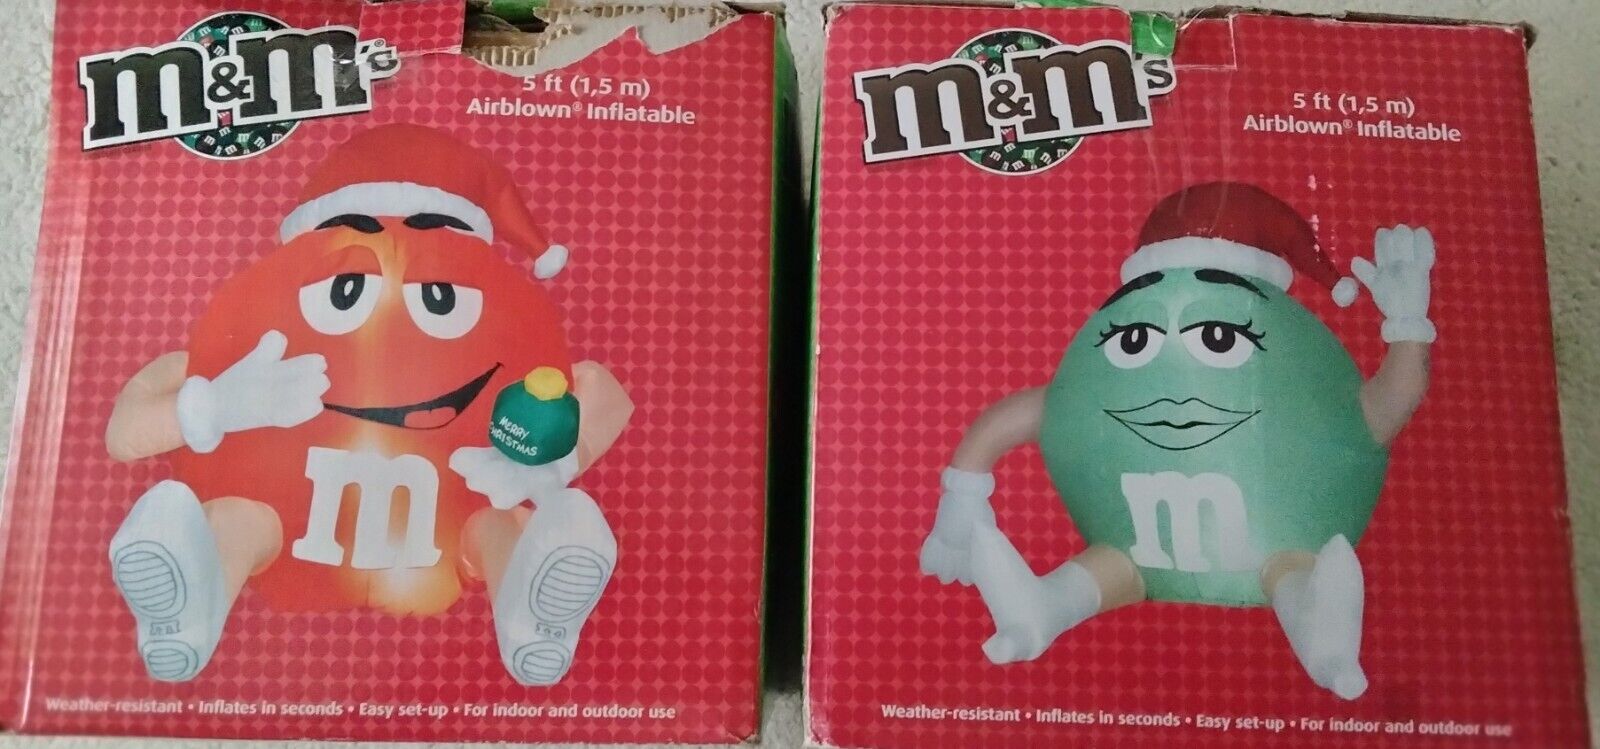 Set Of Two 2011 Gemmy 5foot Tall M&M Air blown Inflatables